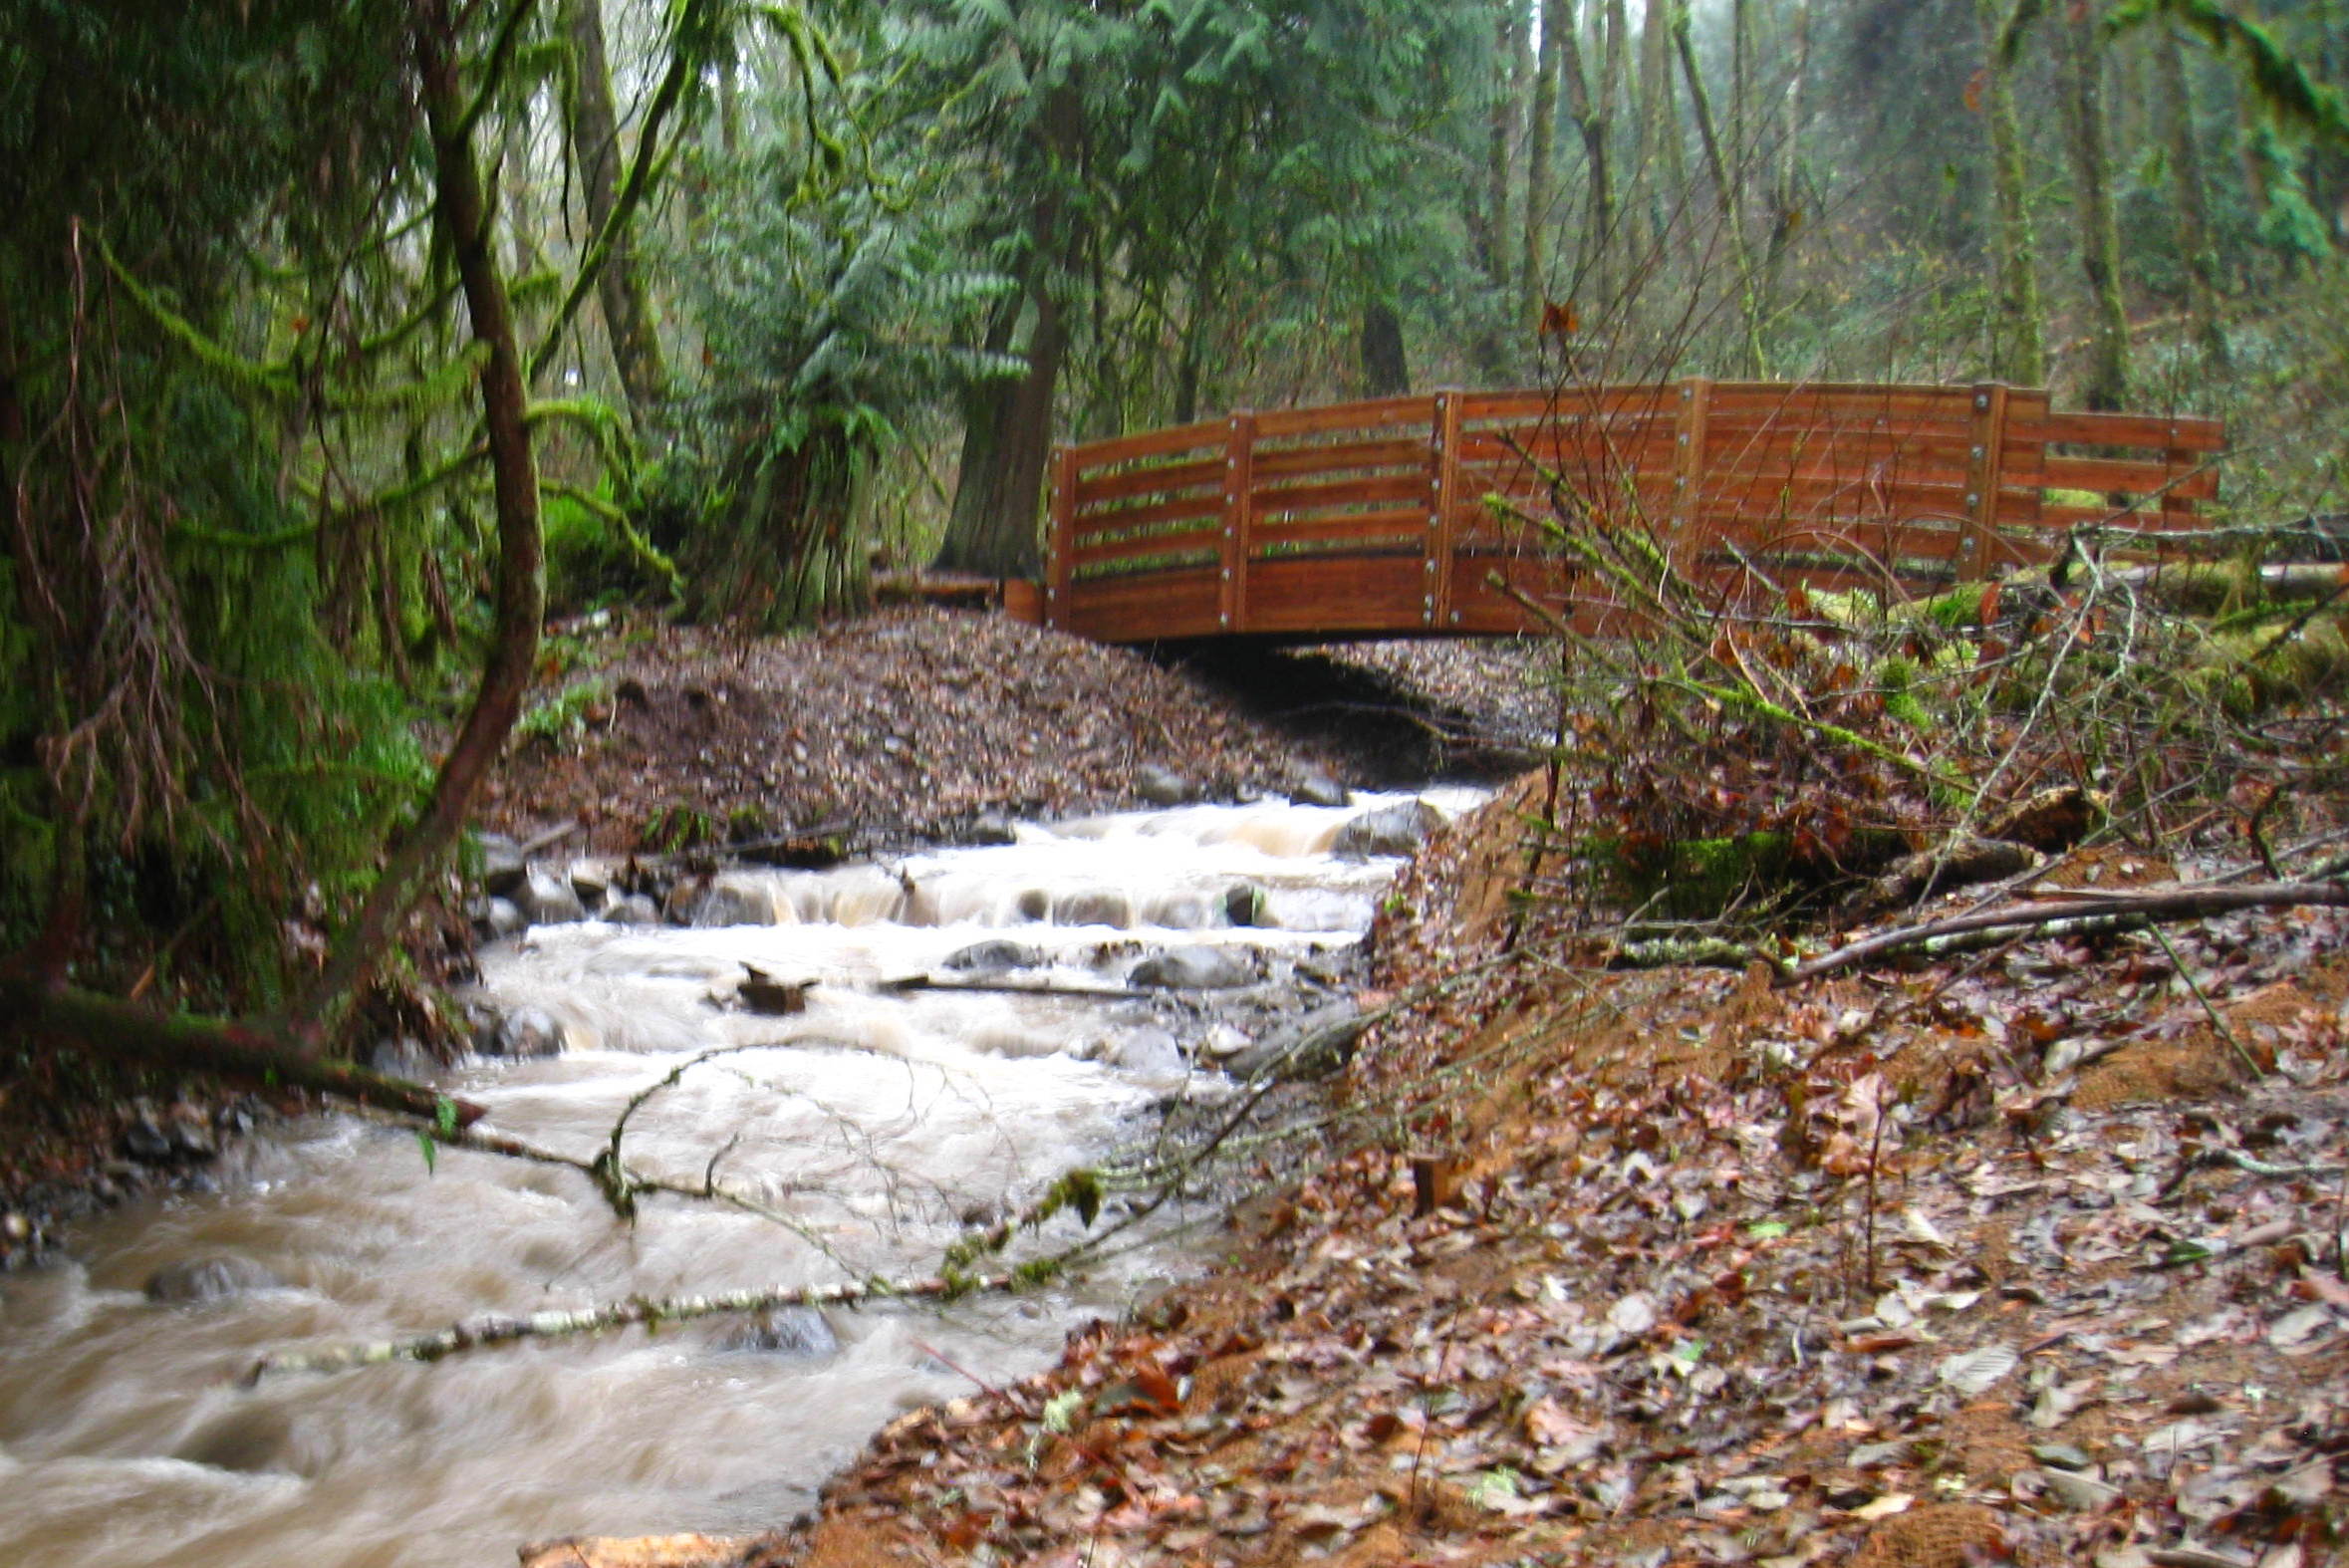 The new (2014) Nettle Creek Bridge in the Tryon Creek State Natural Area, which now allows migratory fish such as cutthroat trout to move beyond the former fish passage barrier to upstream habitat.